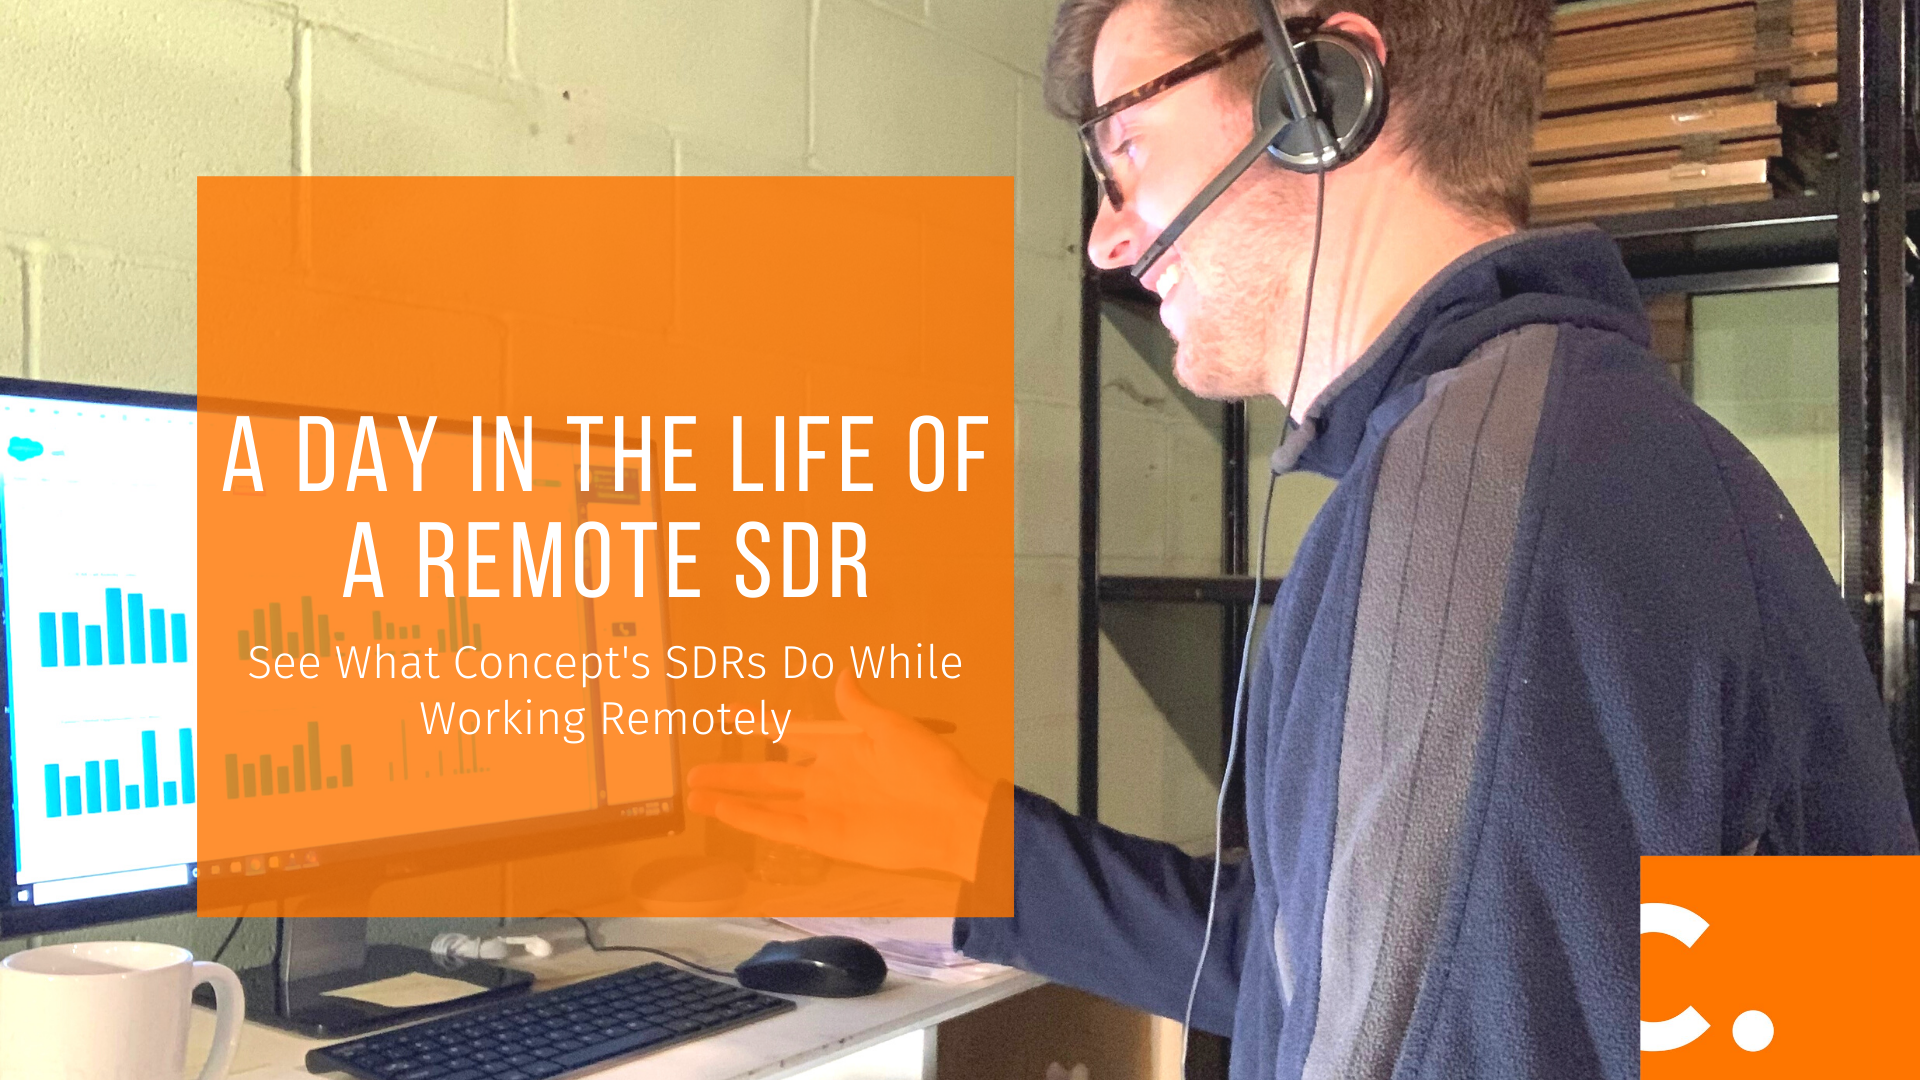 A day in the life of a remote working SDR